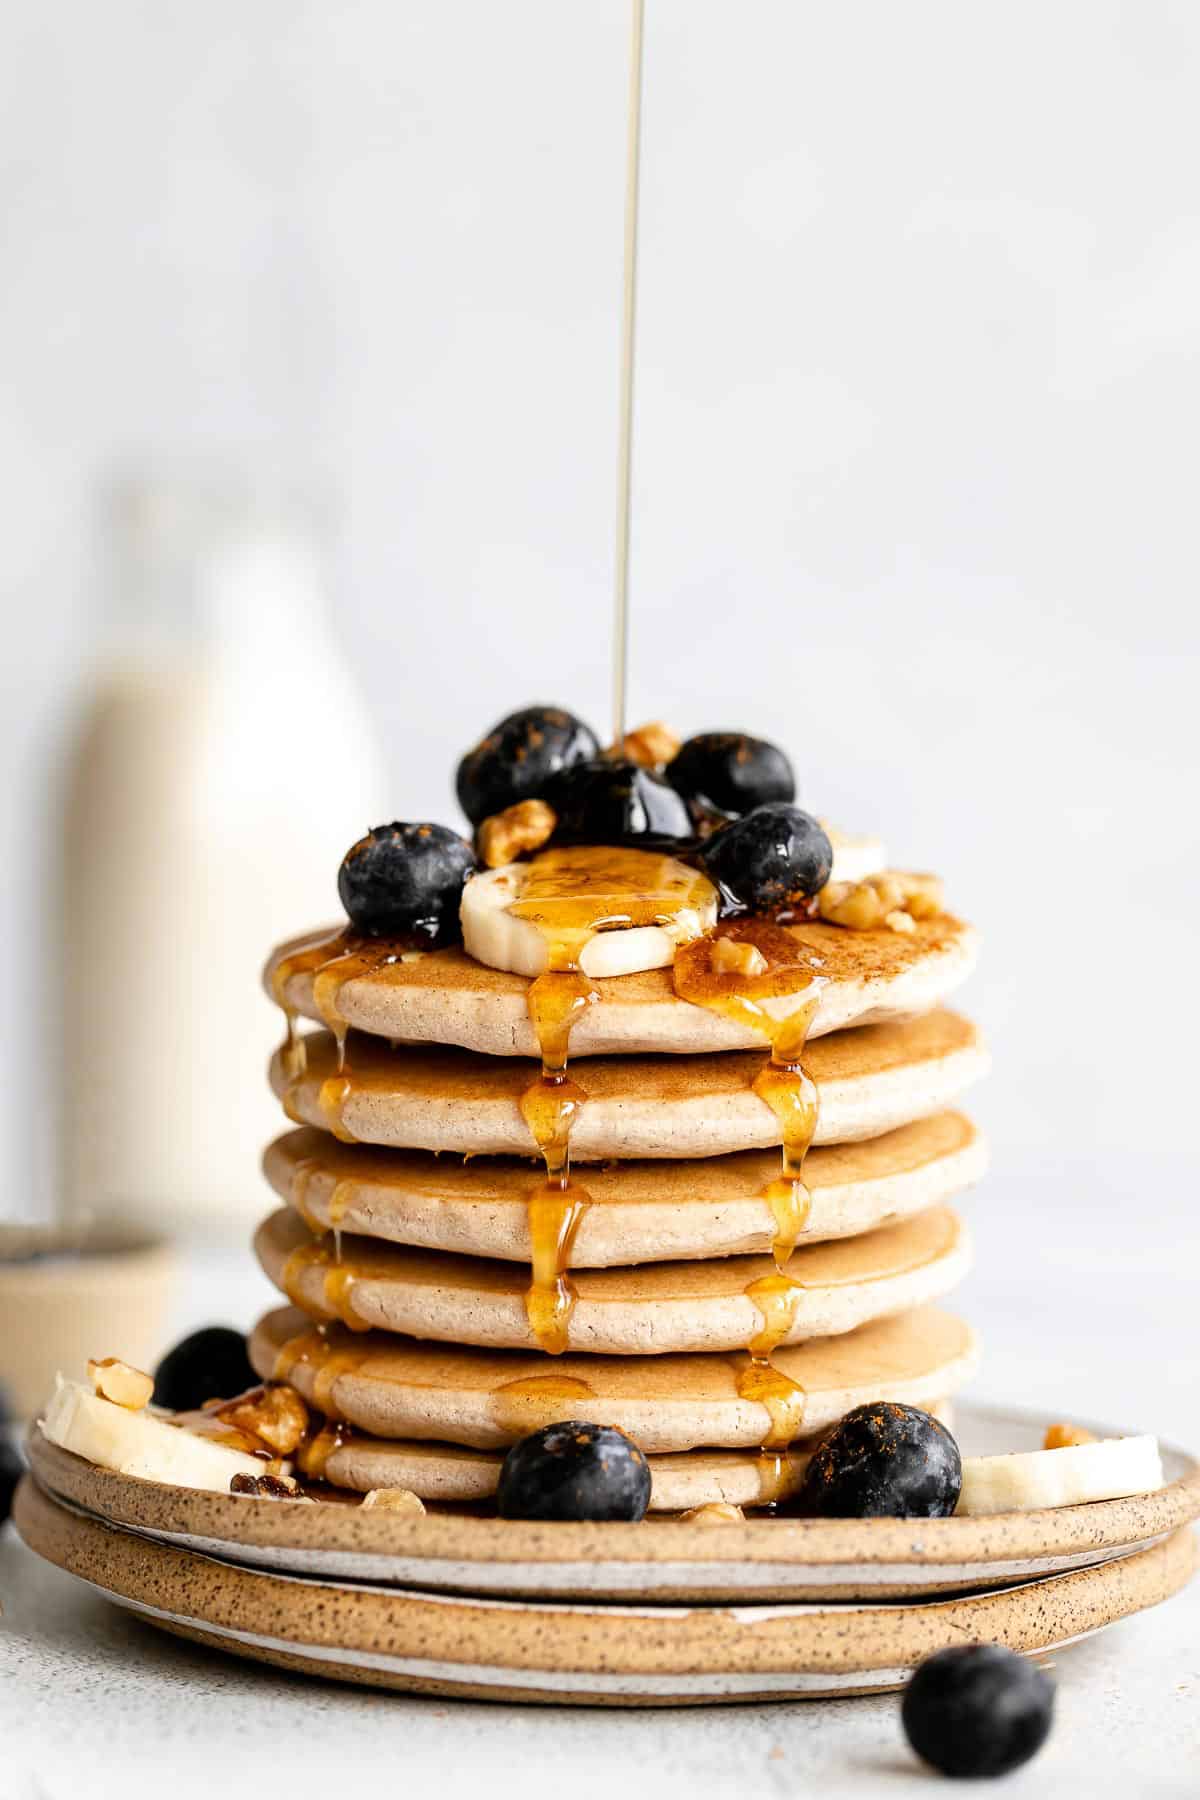 Vegan buckwheat pancakes with blueberries on top and maple syrup pouring down.